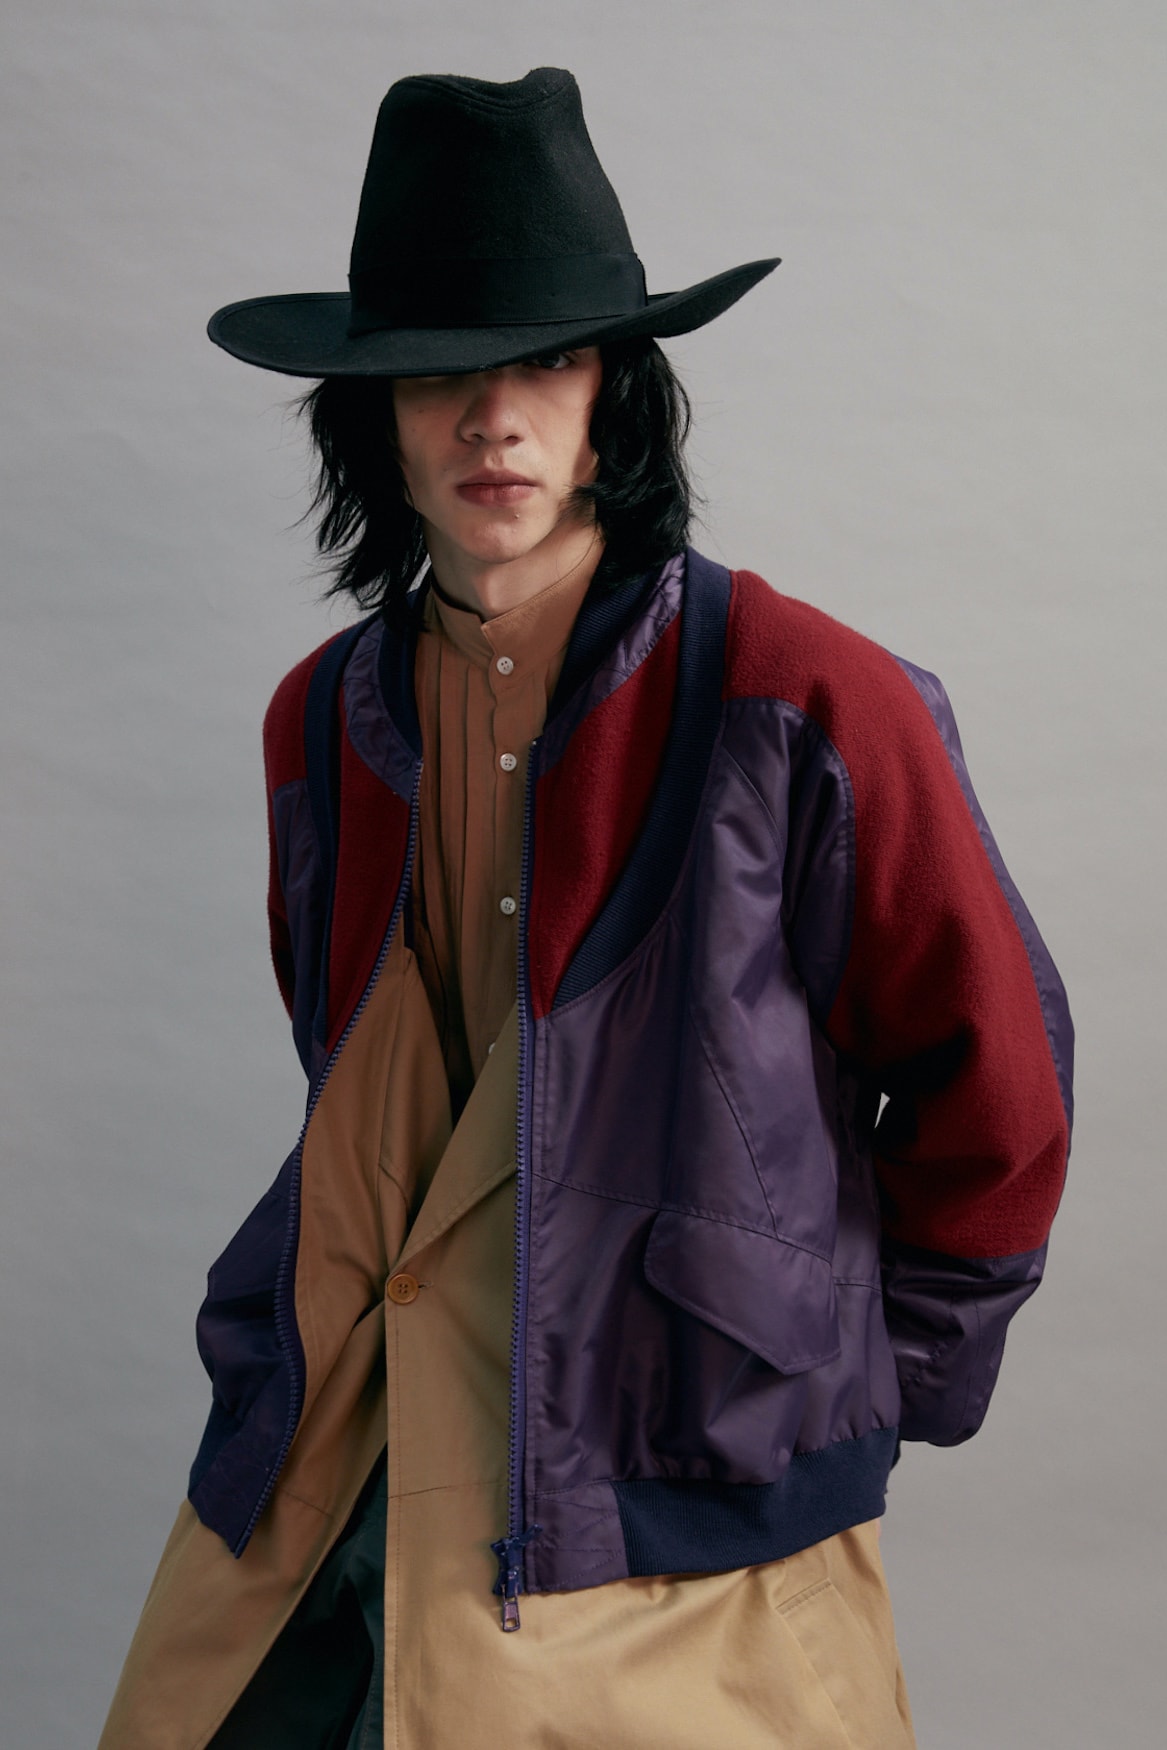 UMAMIISM Spring Summer 2021 Nomads in Paradise Lost Lookbook menswear streetwear ss21 collection jackets shirts hoodies pants trousers